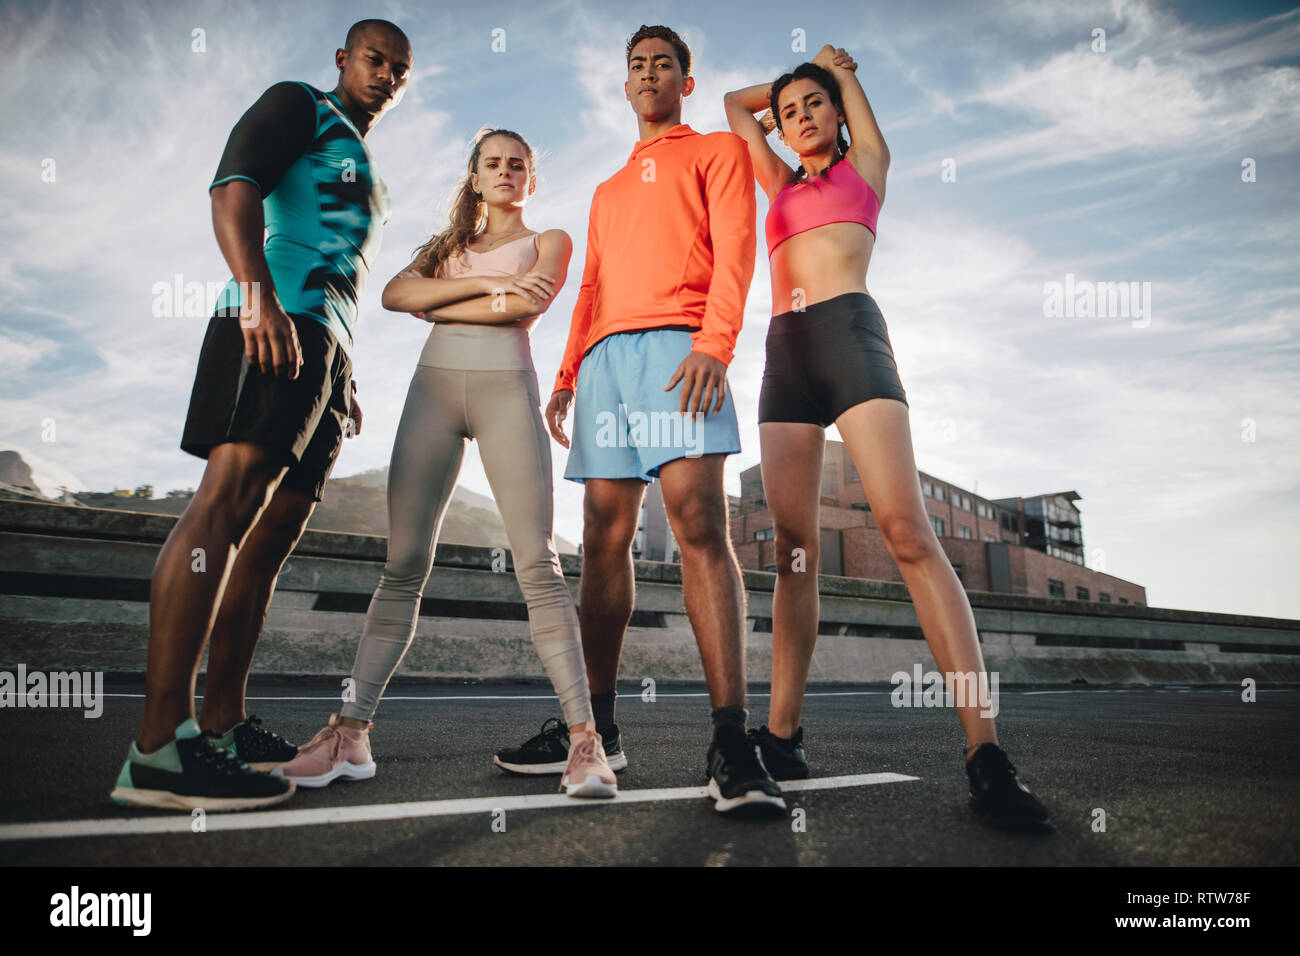 Full length of mixed race friends standing outdoors on the city street after workout. Fitness group standing together after workout. Low angle shot. Stock Photo